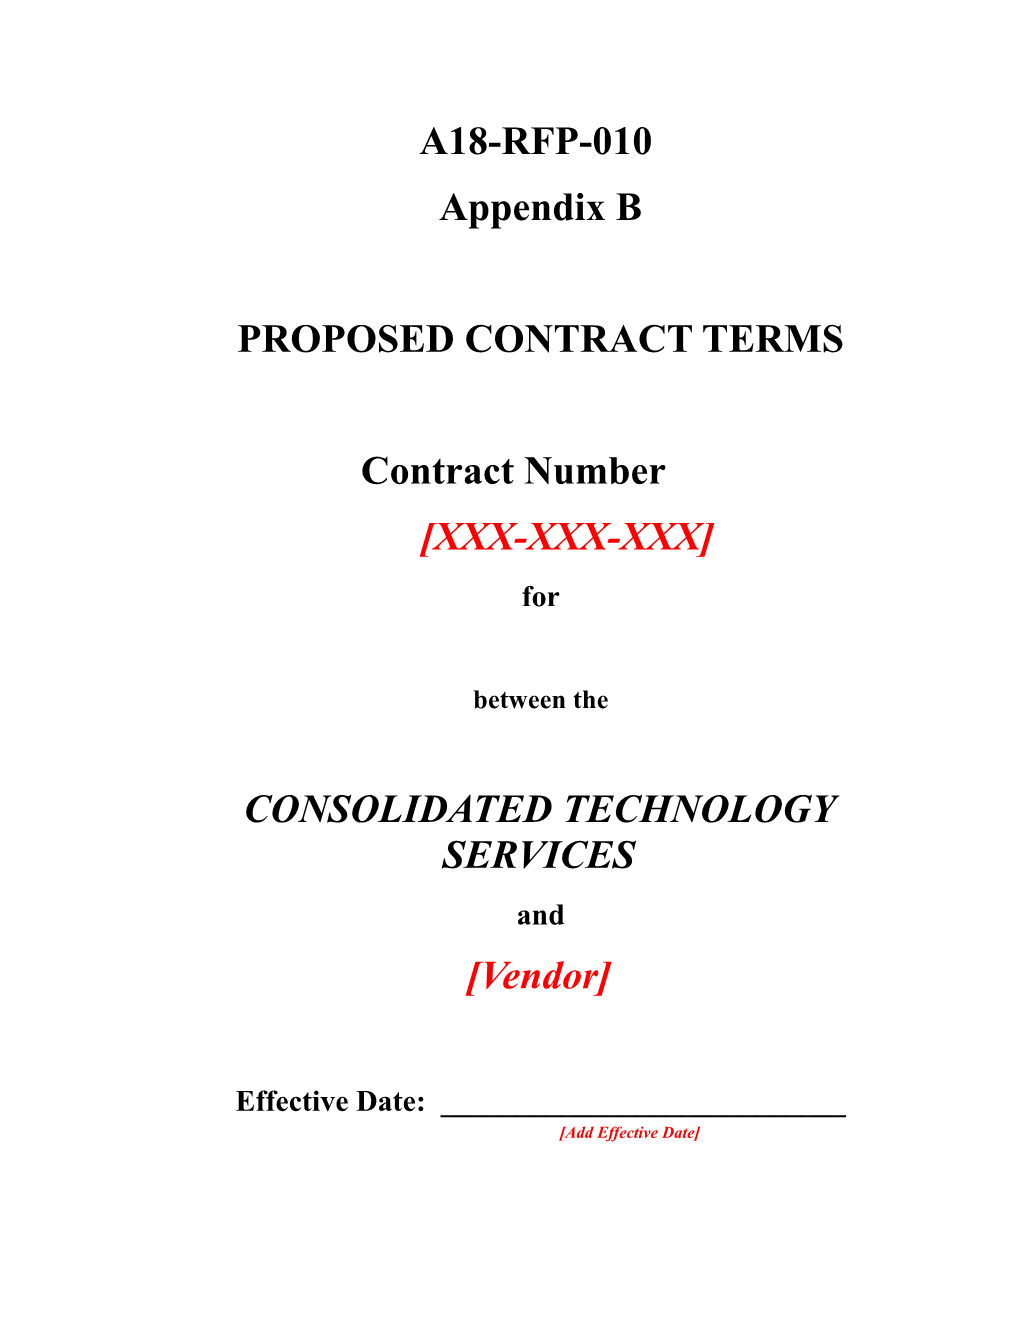 Proposed Contract Terms